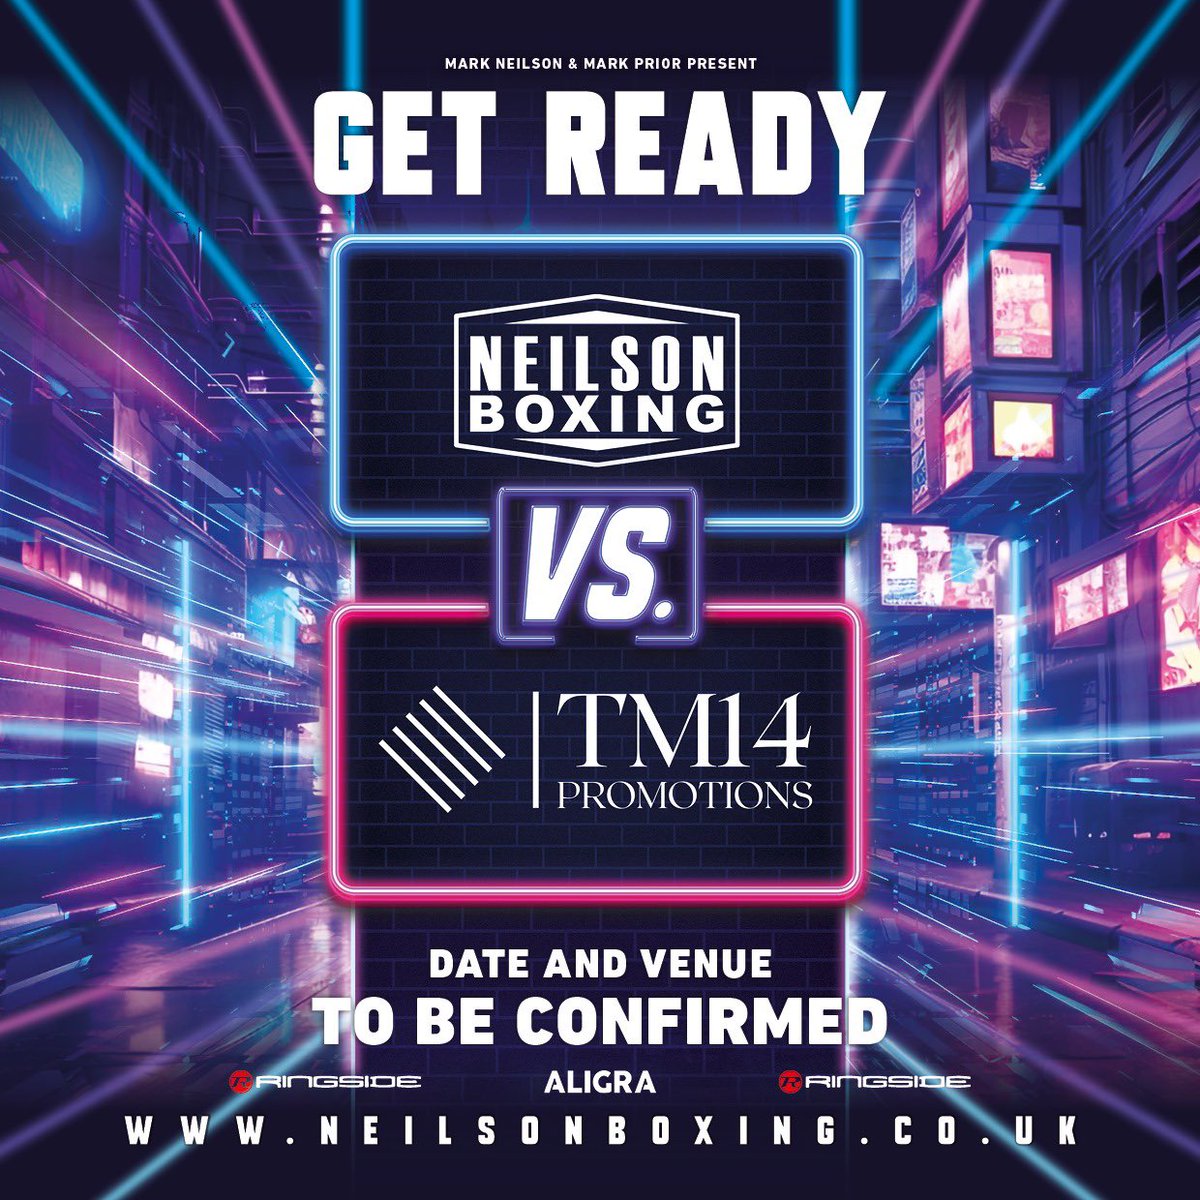 🚨 Promoters Collide 🚨 Mark Neilson & Mark Prior Present - Neilson Boxing vs TM14 Promotions. A night of championship boxing where the best boxers from respective stables compete to find out who is the true number 1🥊 Full announcement of date, venue and line up coming soon👀